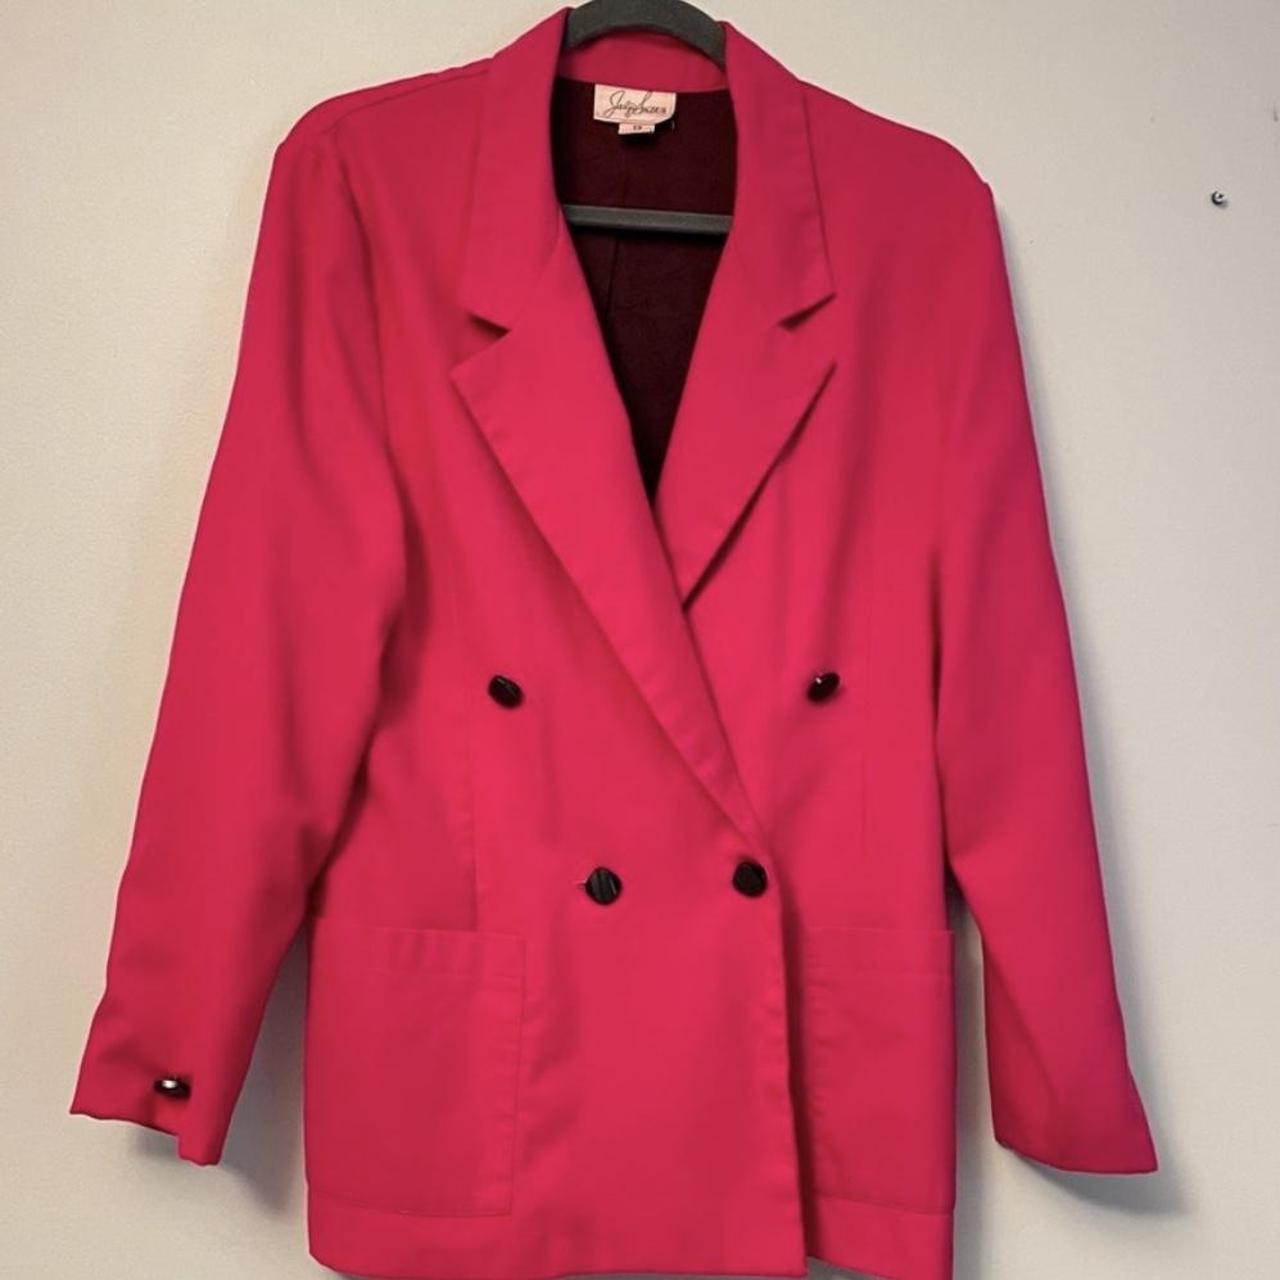 Jaclyn Smith Womens Pink And Navy Jacket Depop